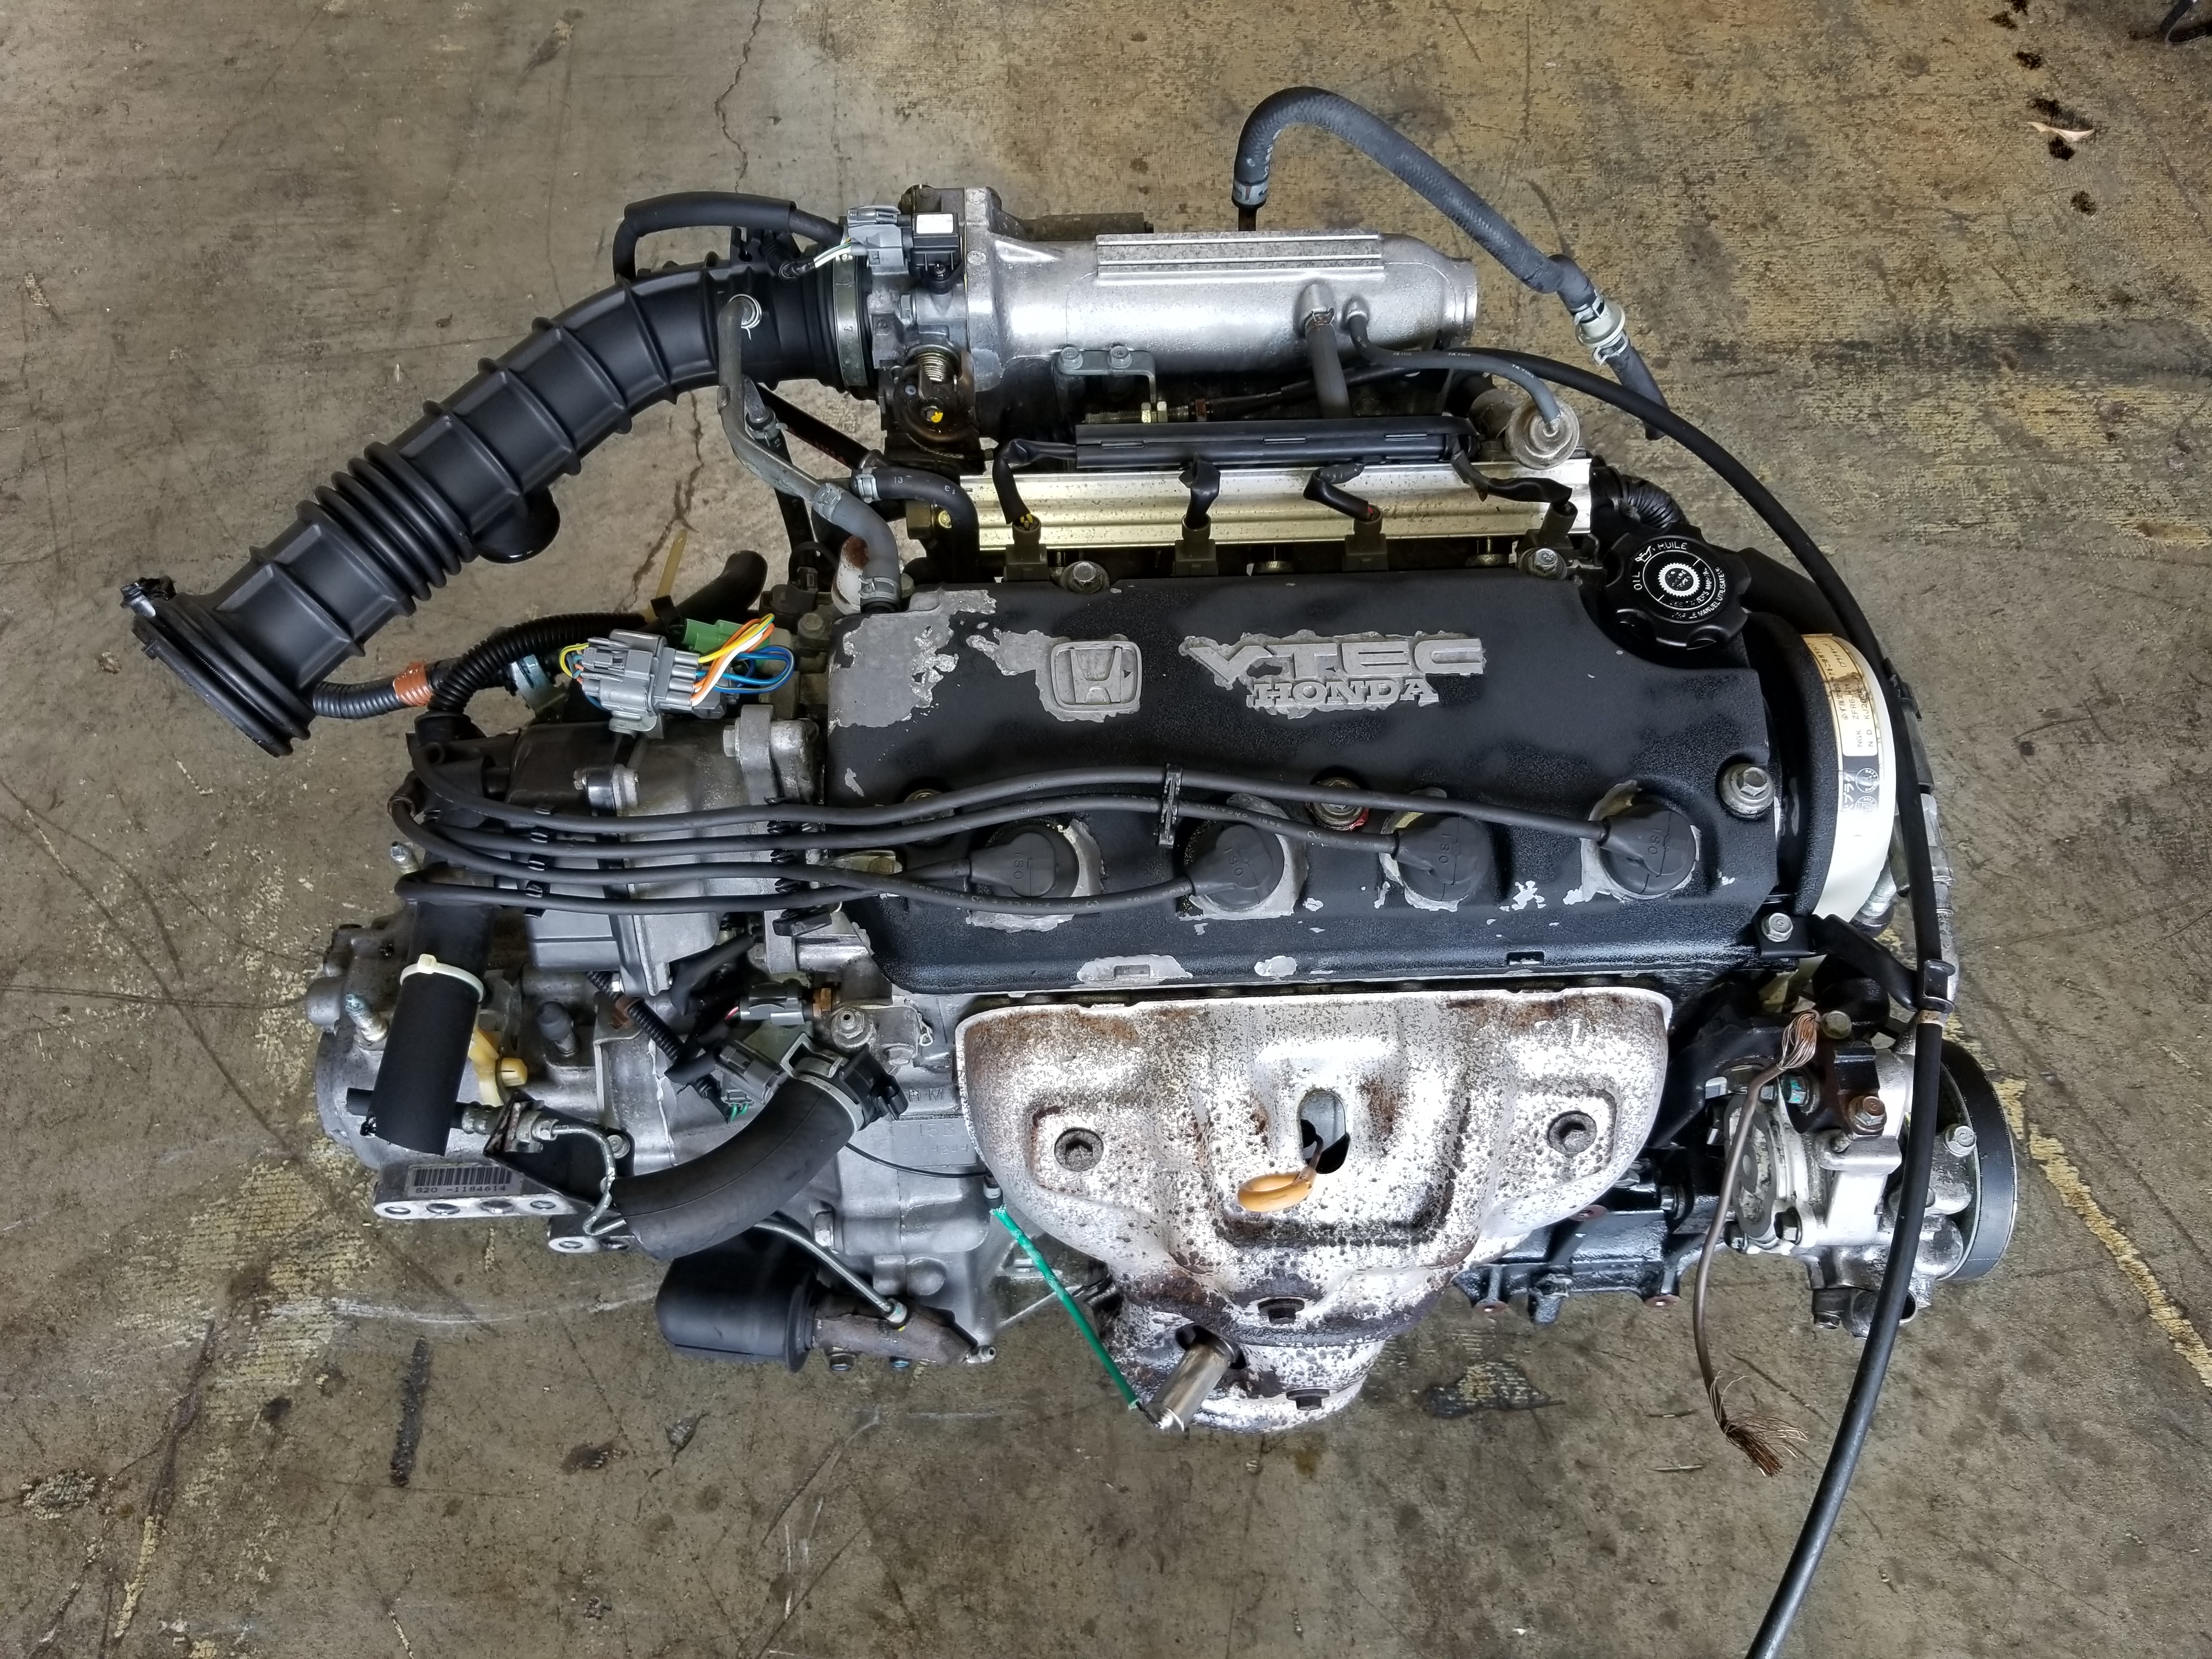 Civic engine for sale